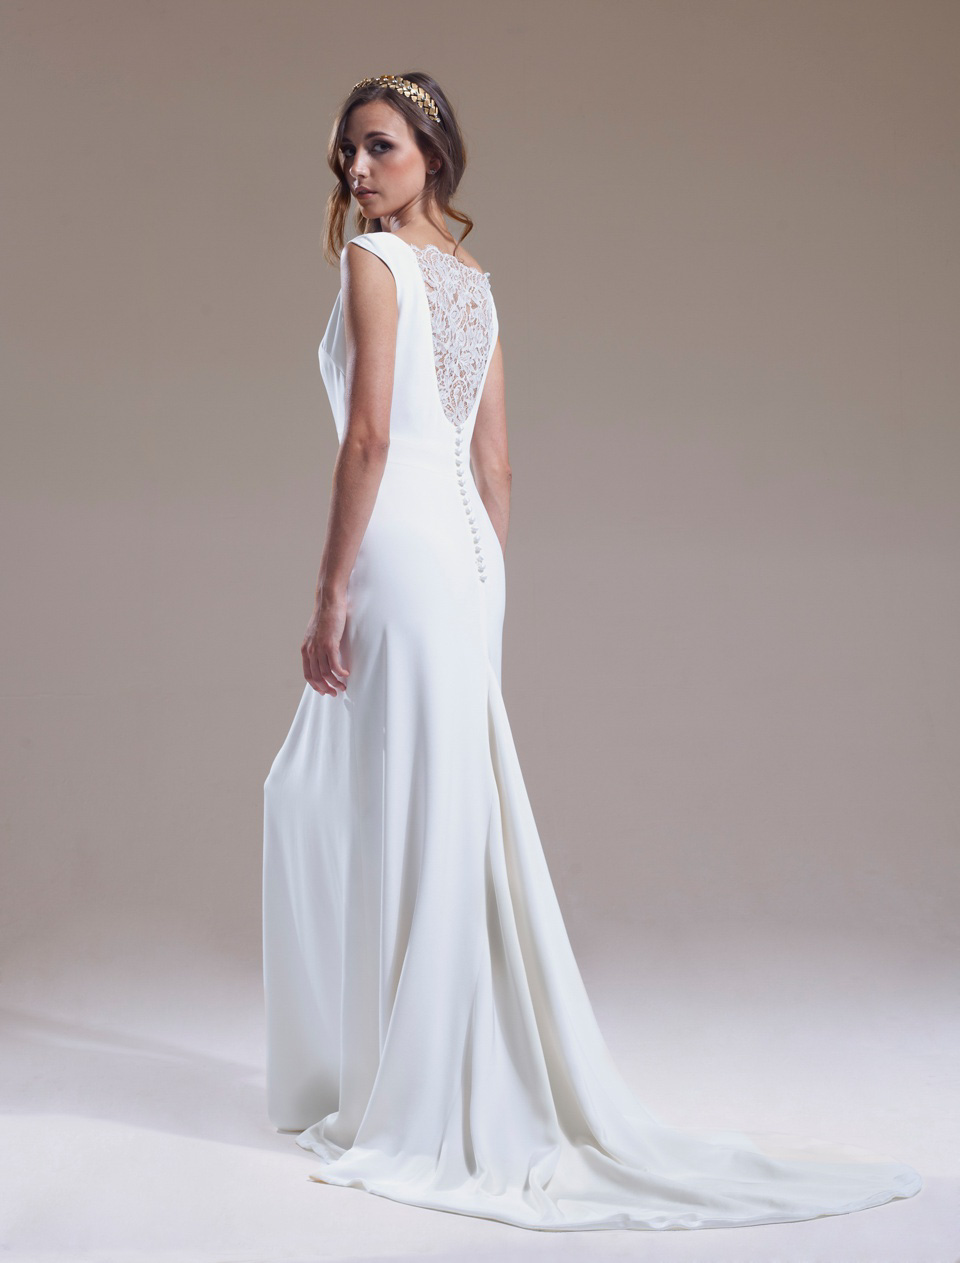 En Pointe – The Graceful & Elegant New Wedding Dress Collection From ...